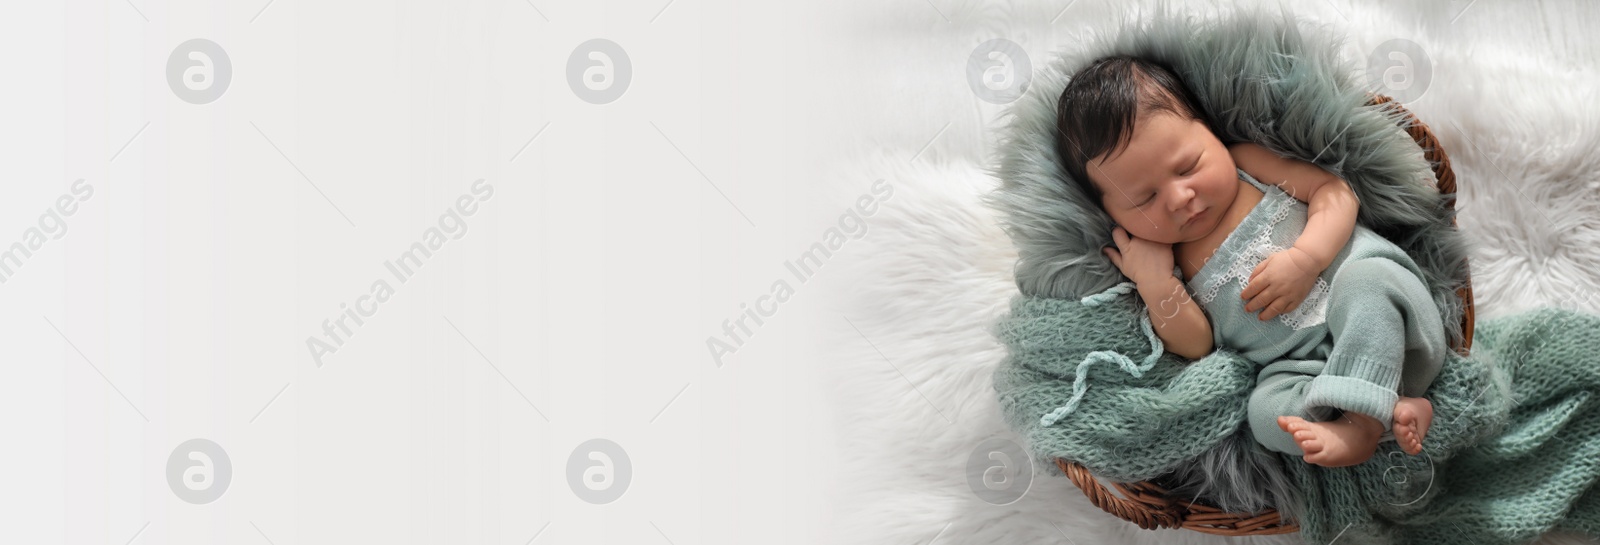 Image of Cute newborn baby sleeping in wicker basket, top view with space for text. Banner design